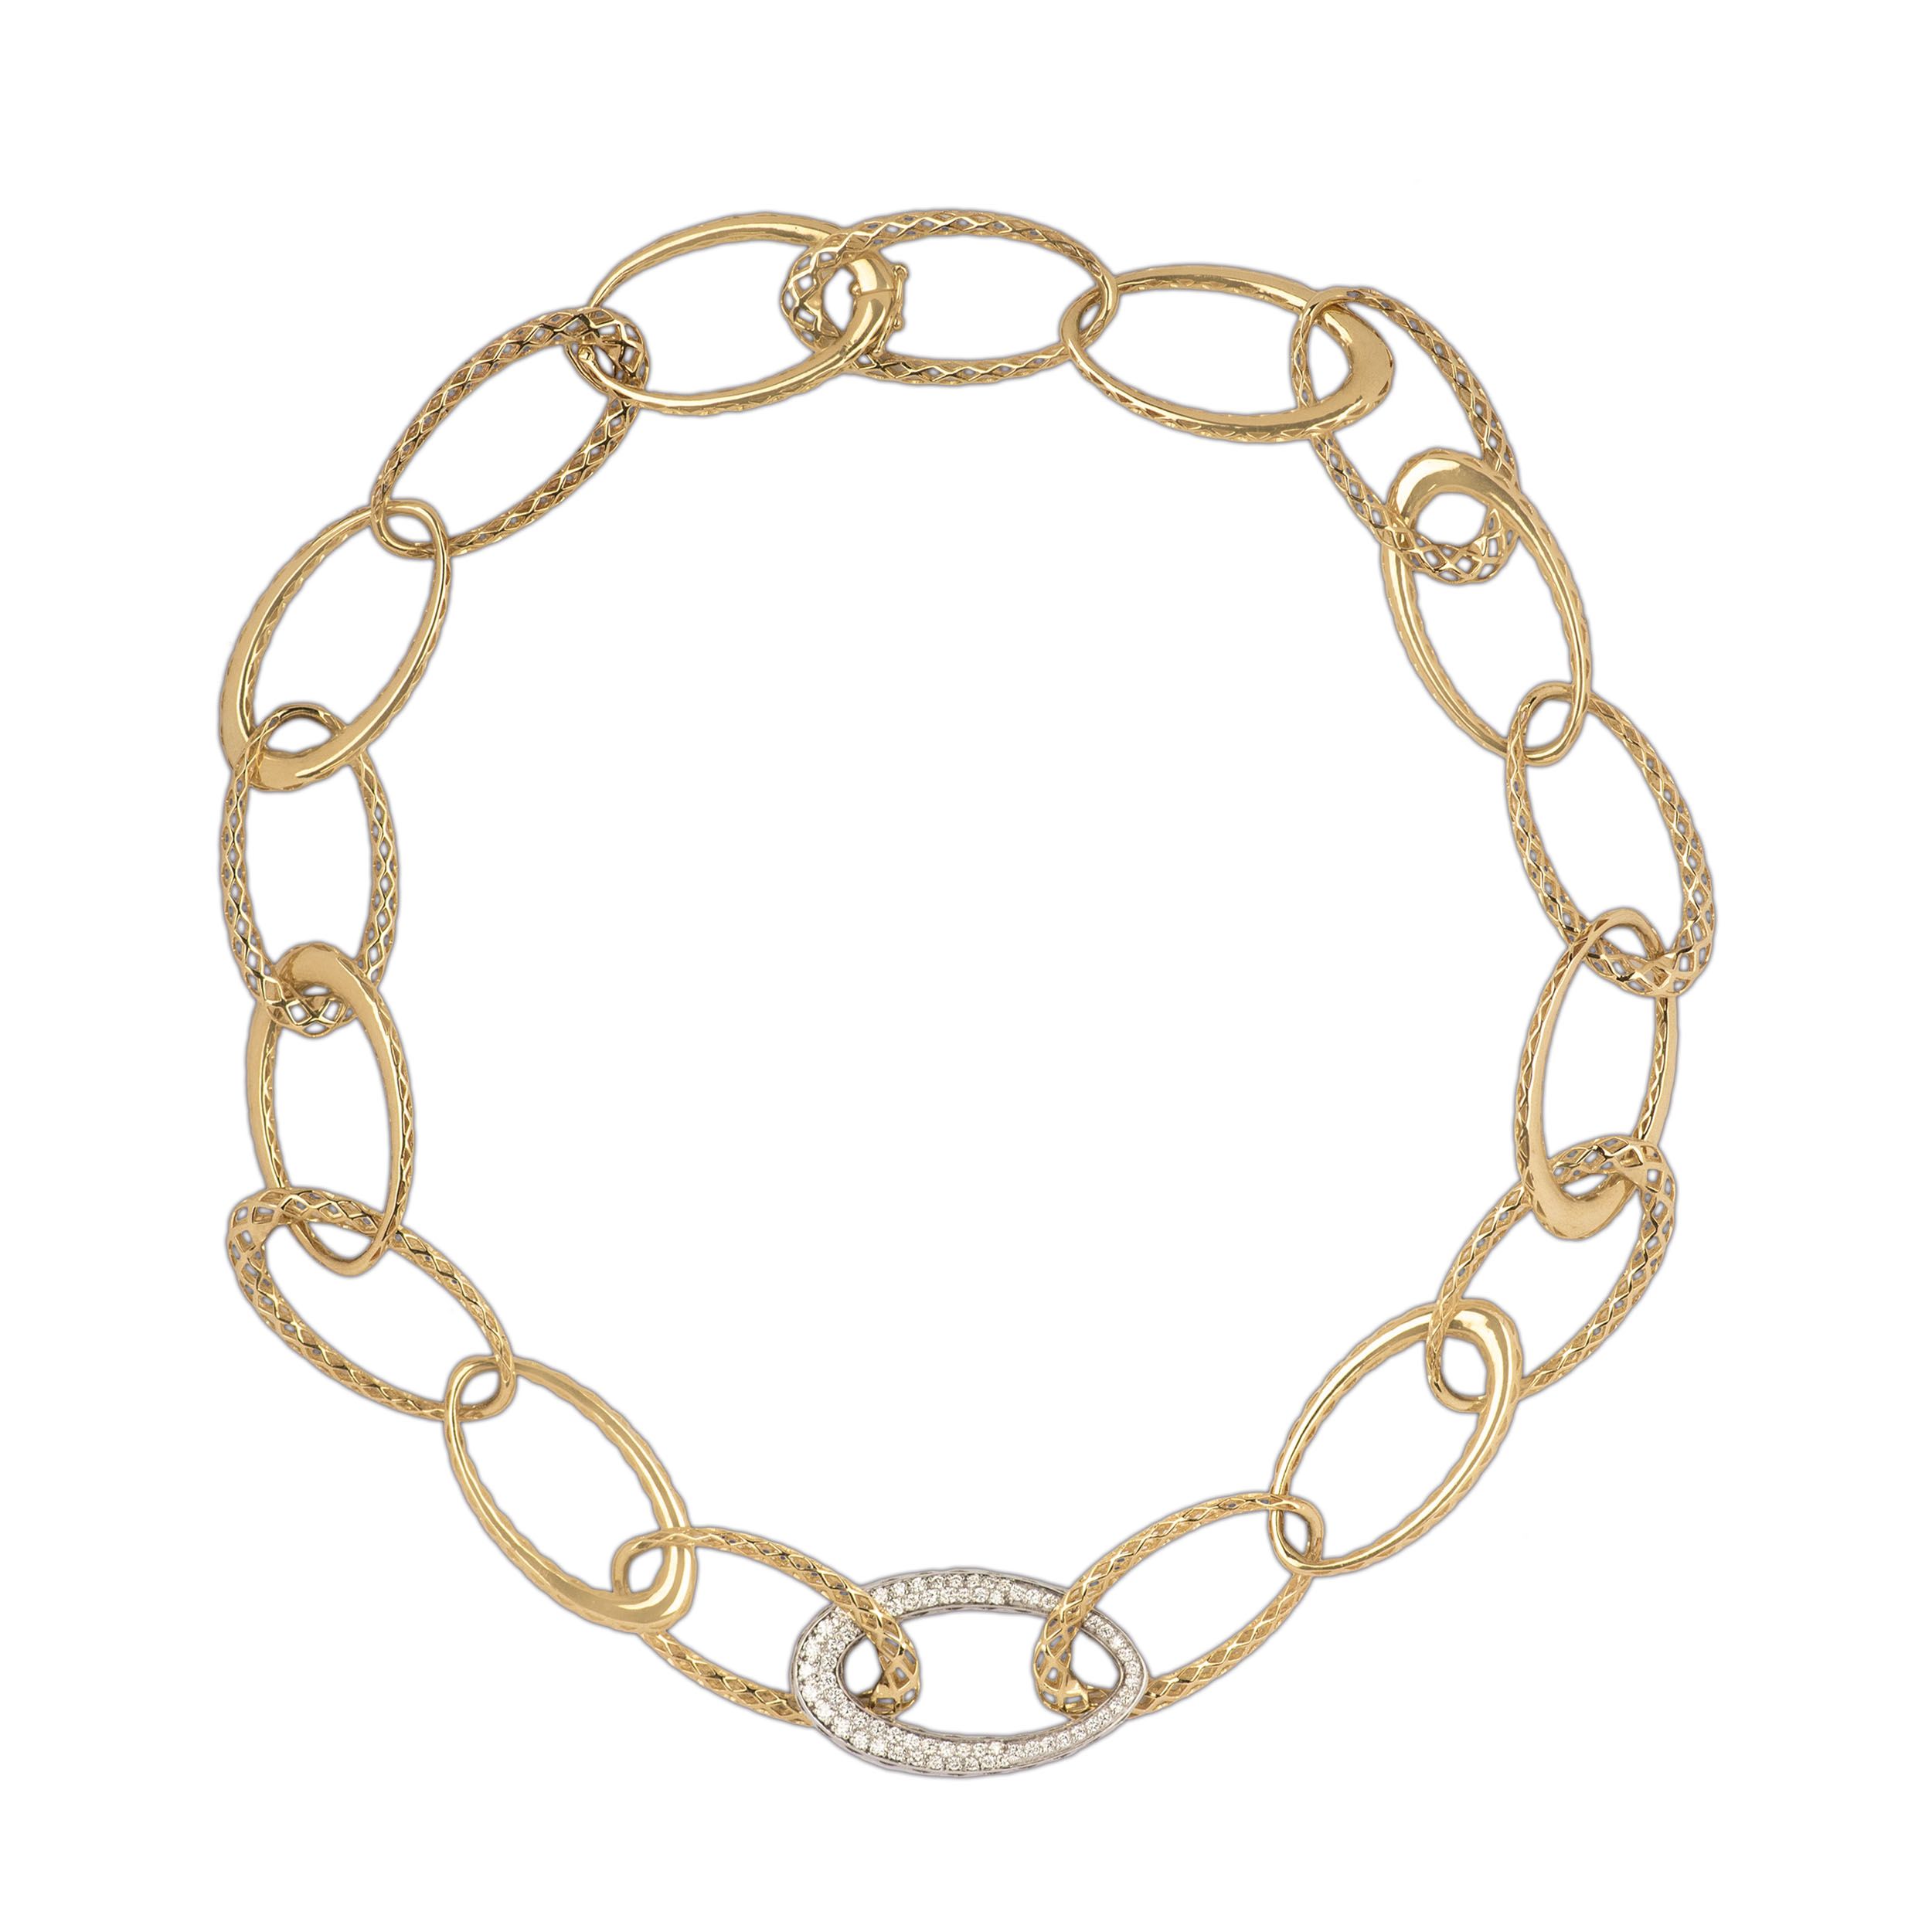 chain necklace made from gold and d